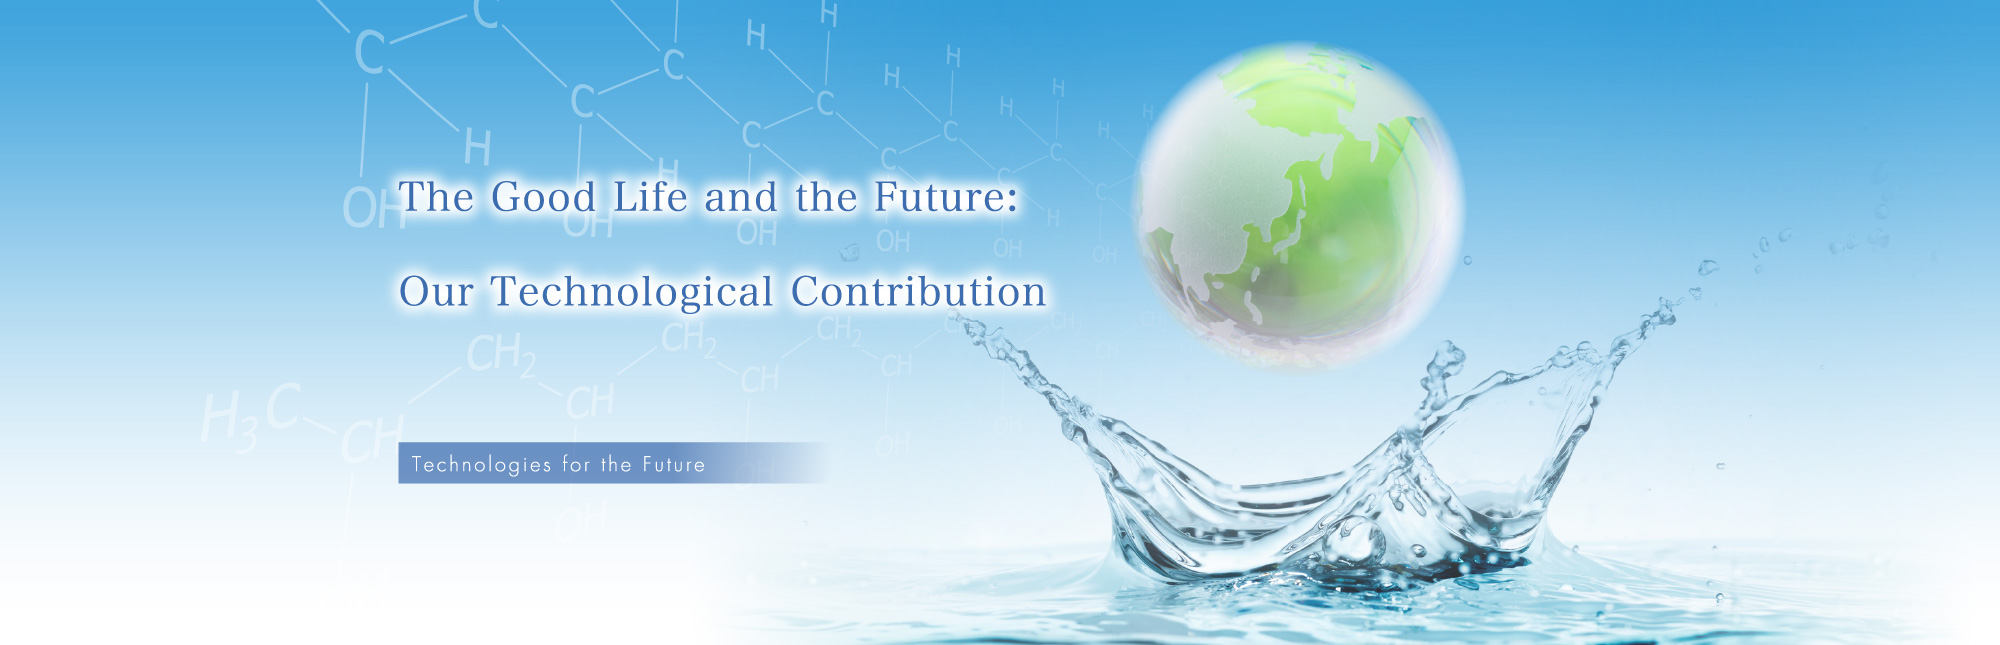 The Good Life and the Future:Our Technological Contribution  Technologies for the Future